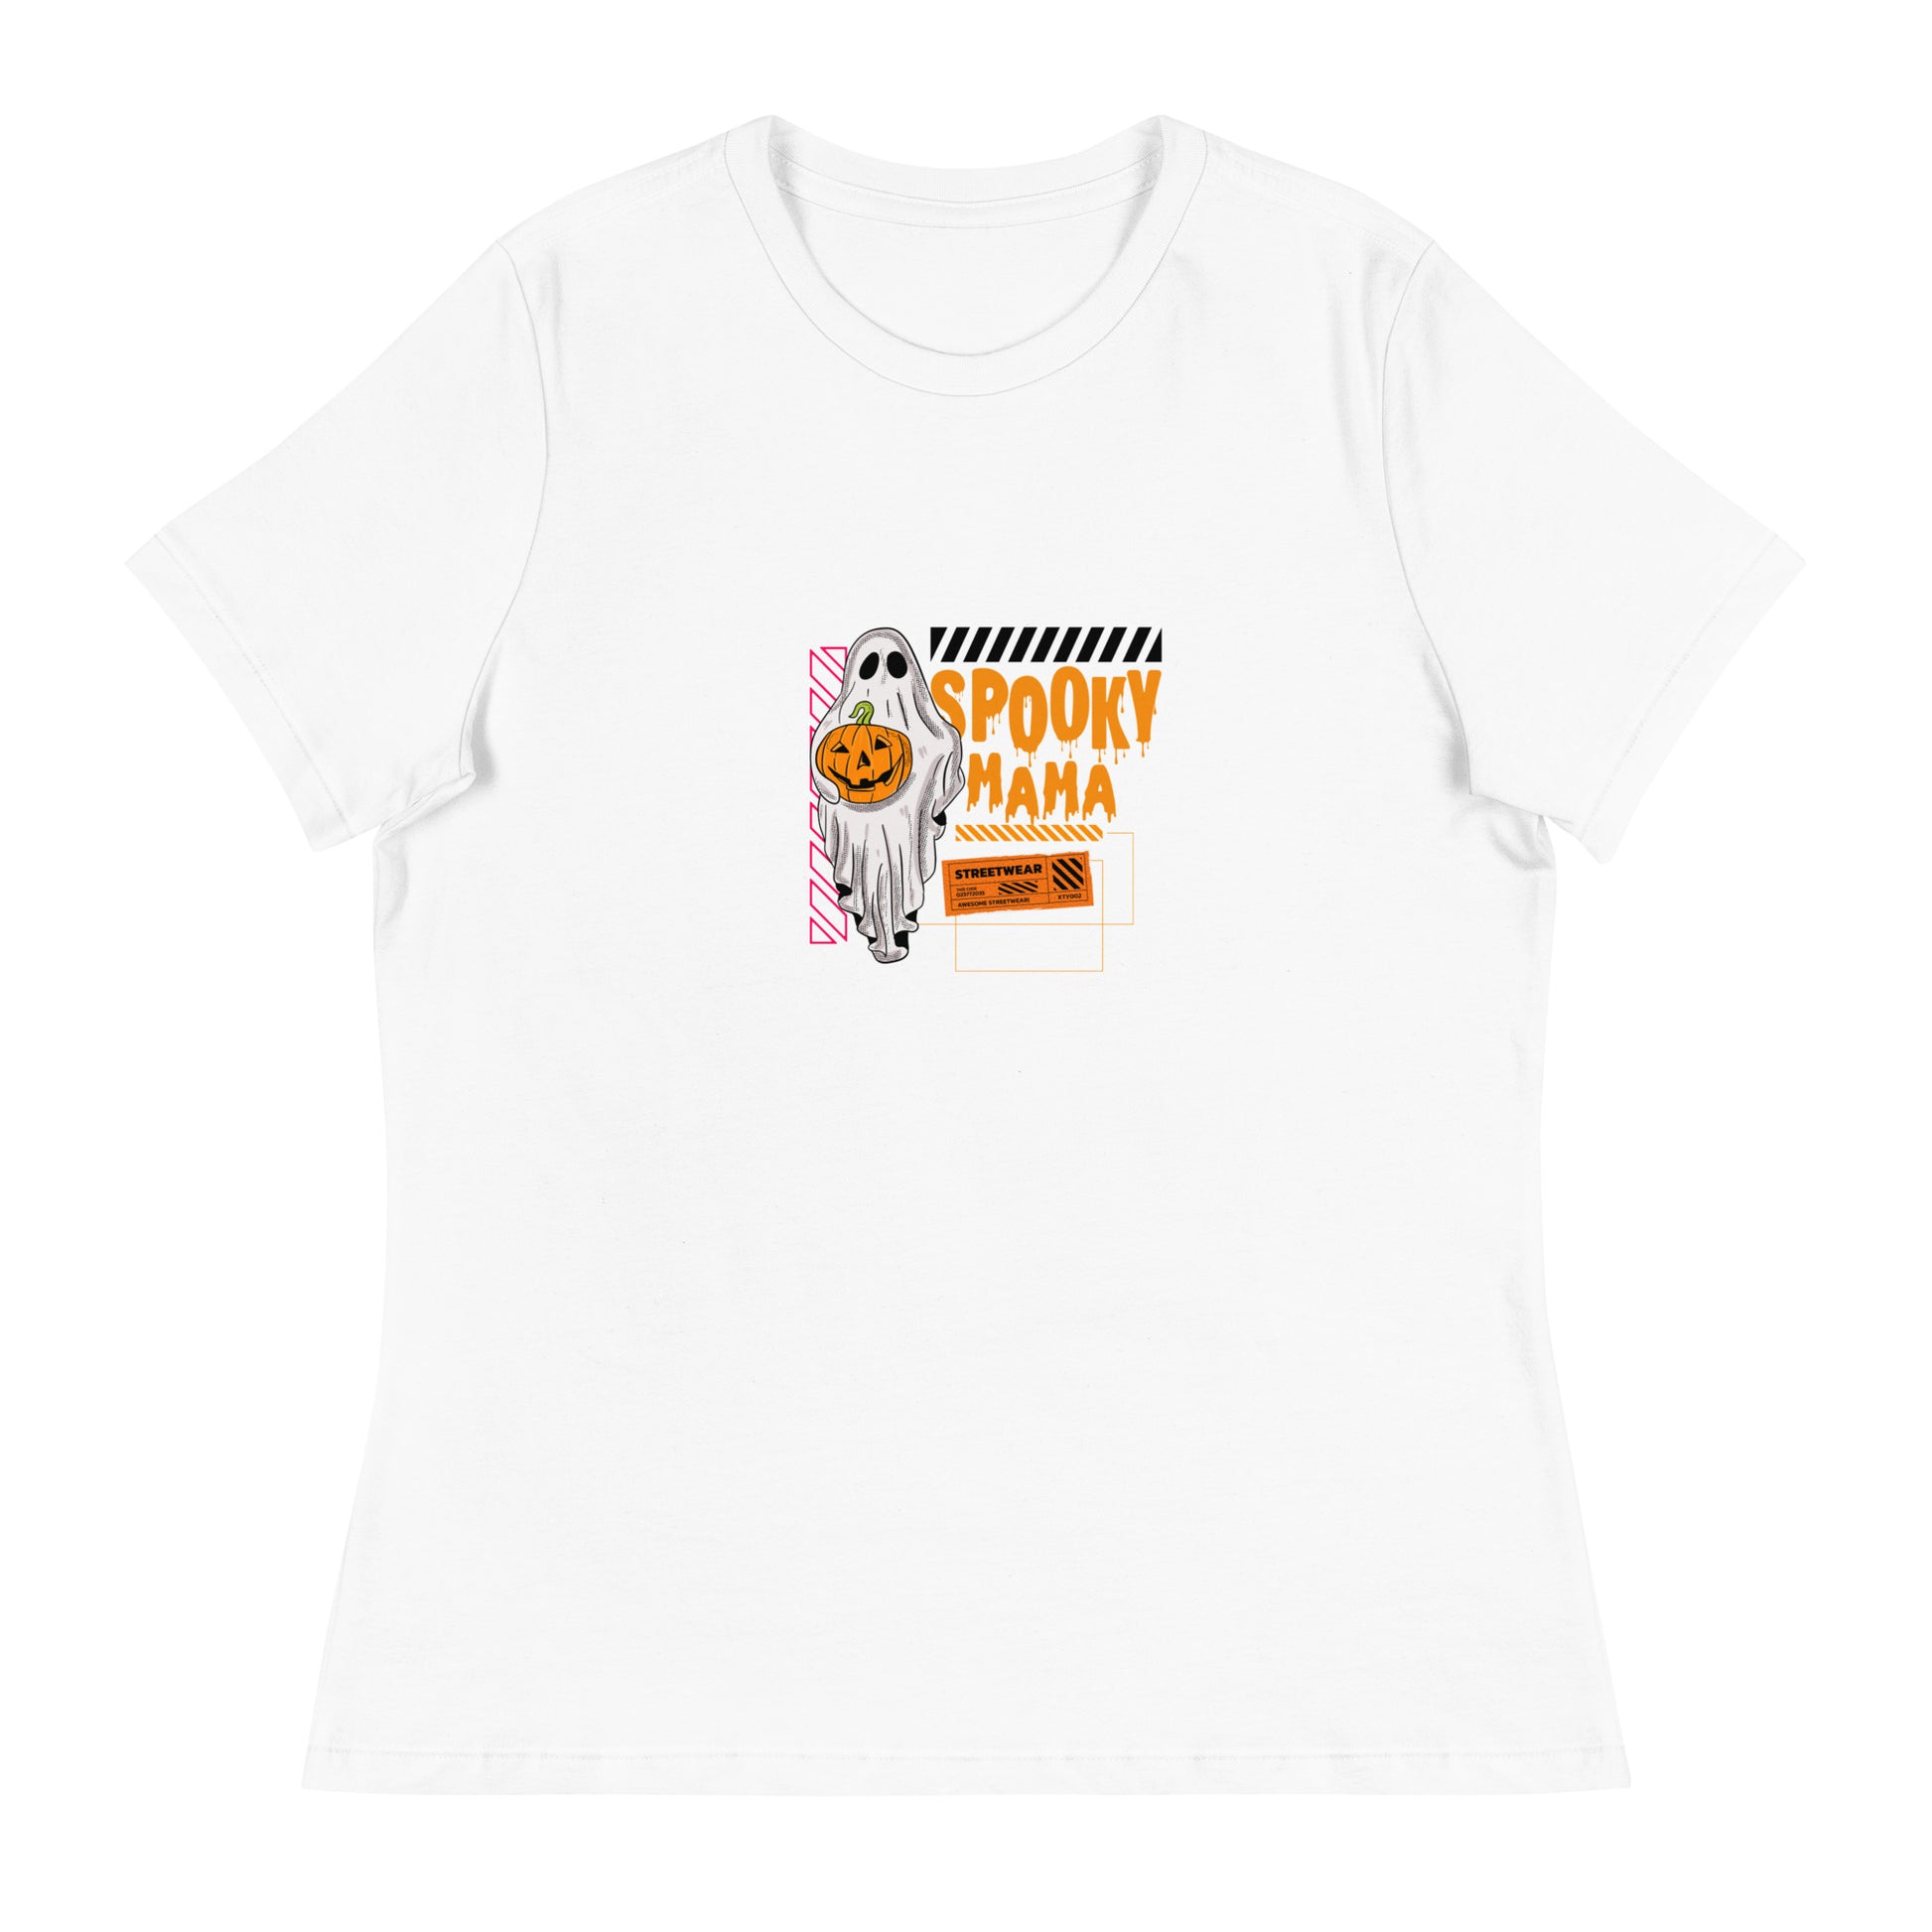 Women's Relaxed T-Shirt Lomwn